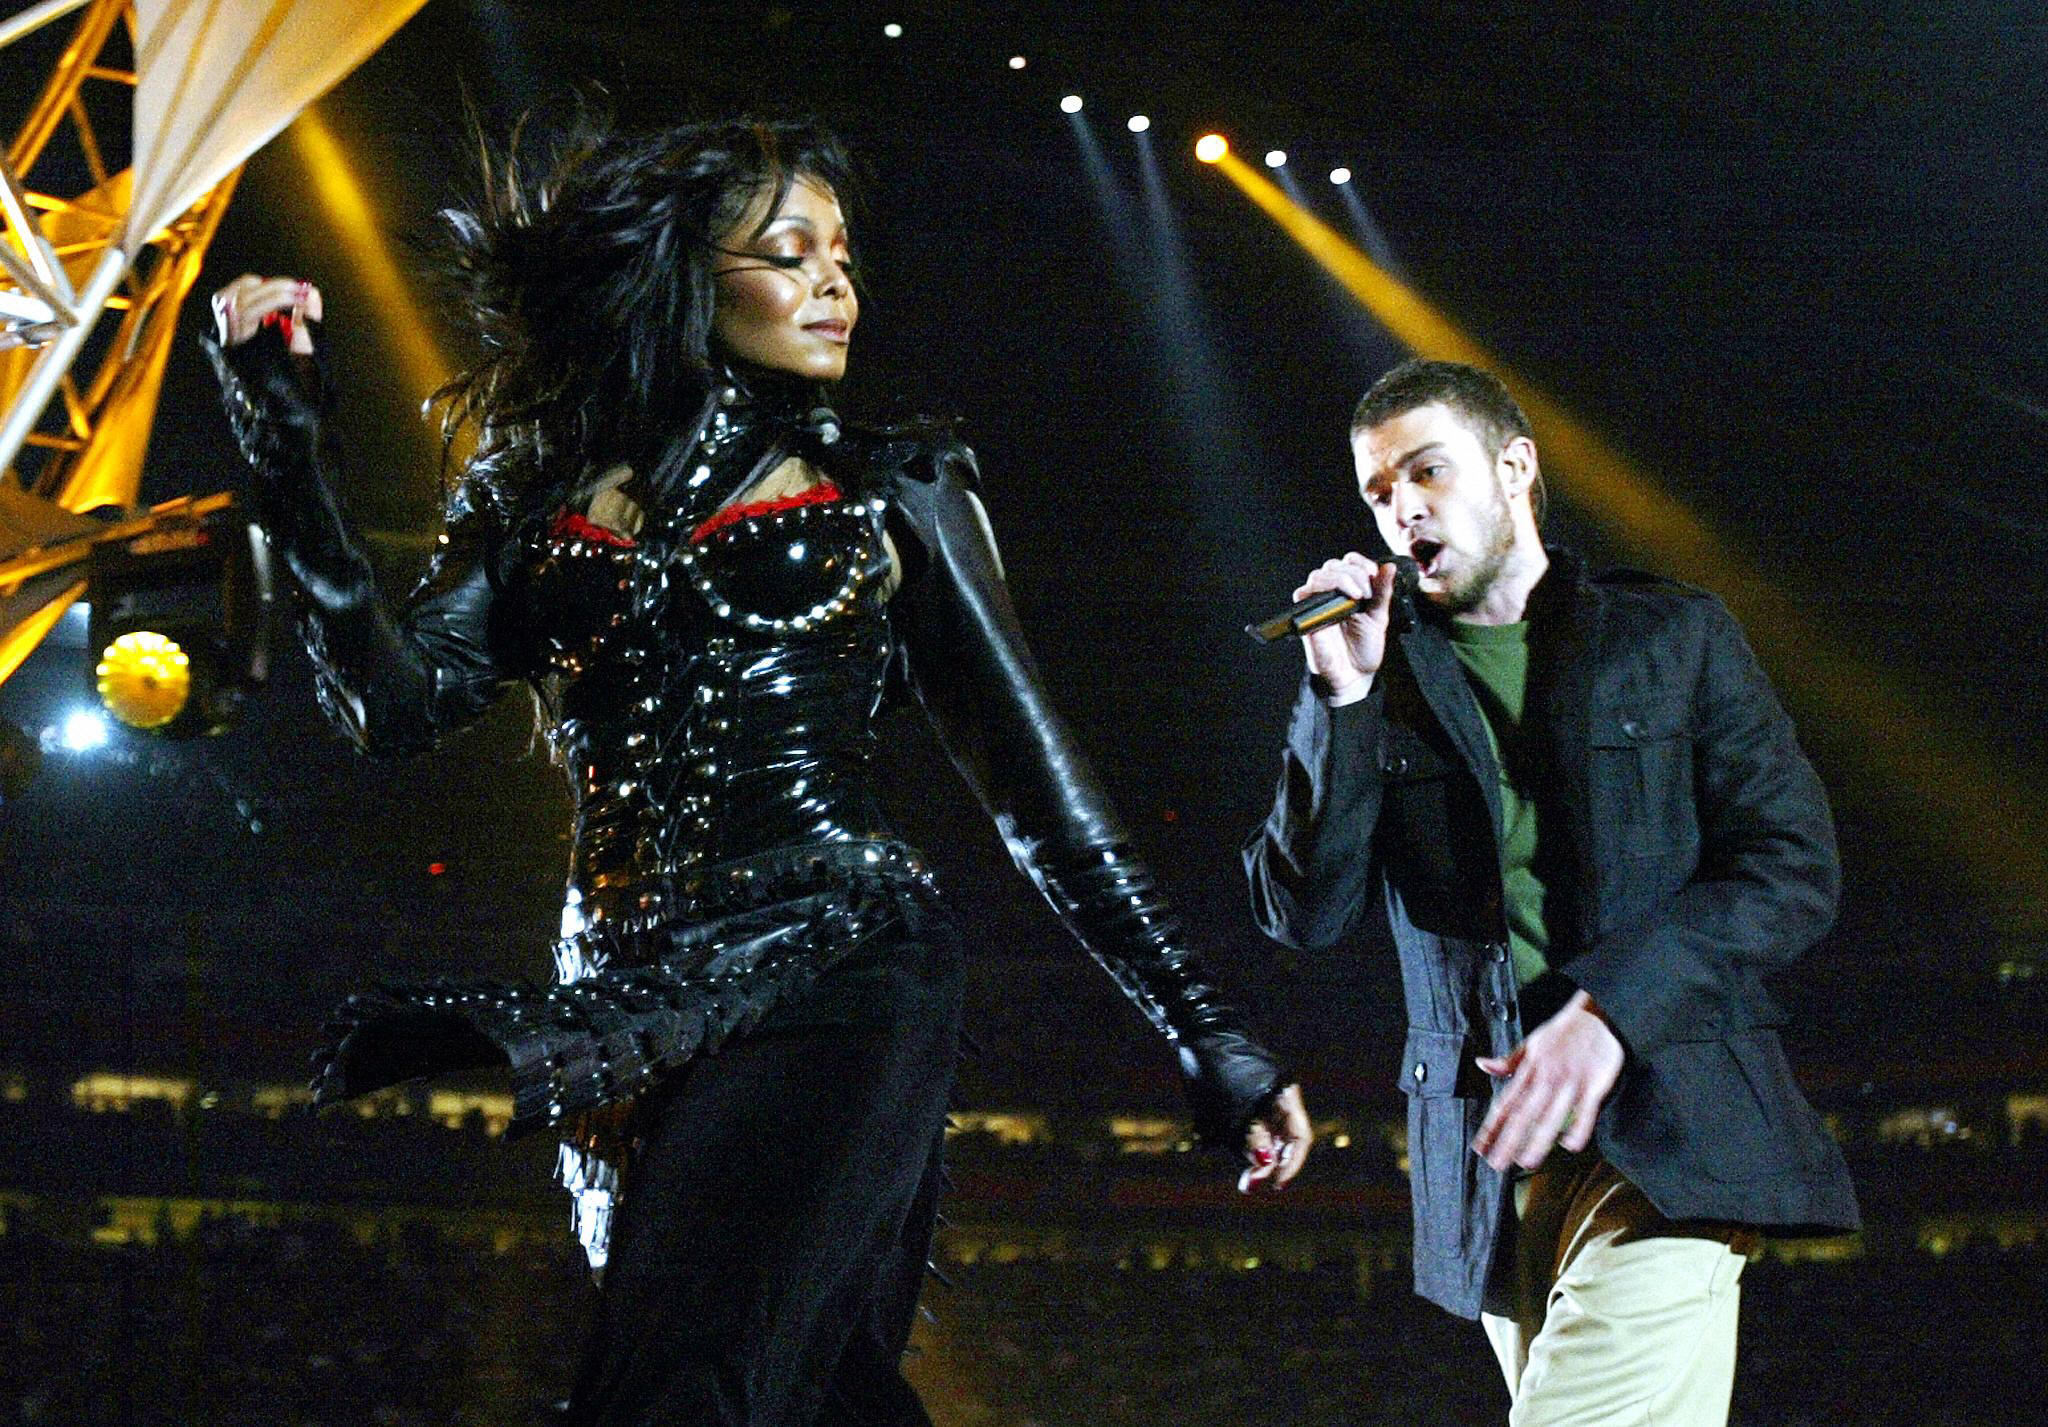 PHOTO: Janet Jackson and Justin Timberlake on stage at the half-time show at Super Bowl XXXVIII at Reliant Stadium, Feb. 1, 2004, in Houston.